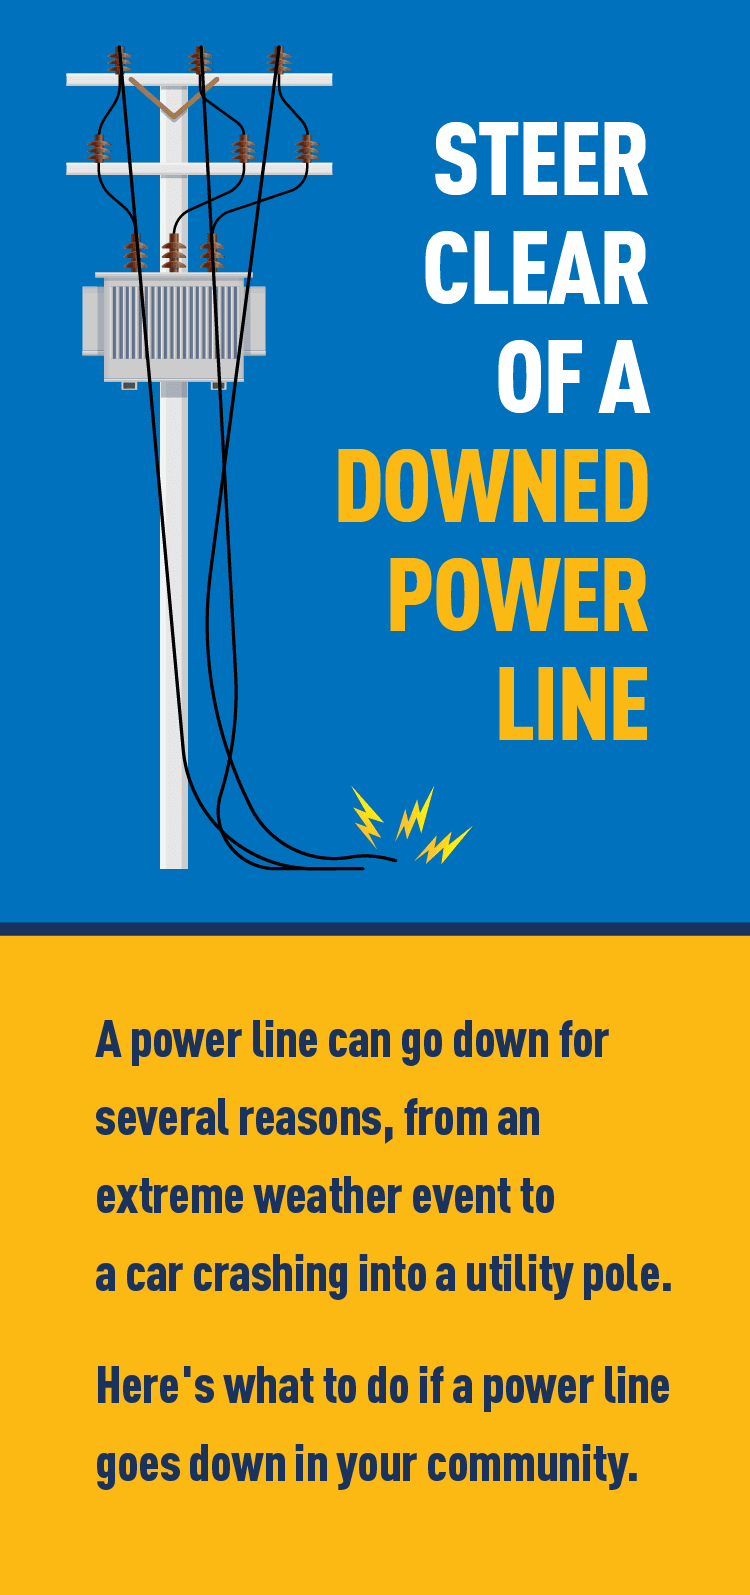 Graphic of a downed power line.